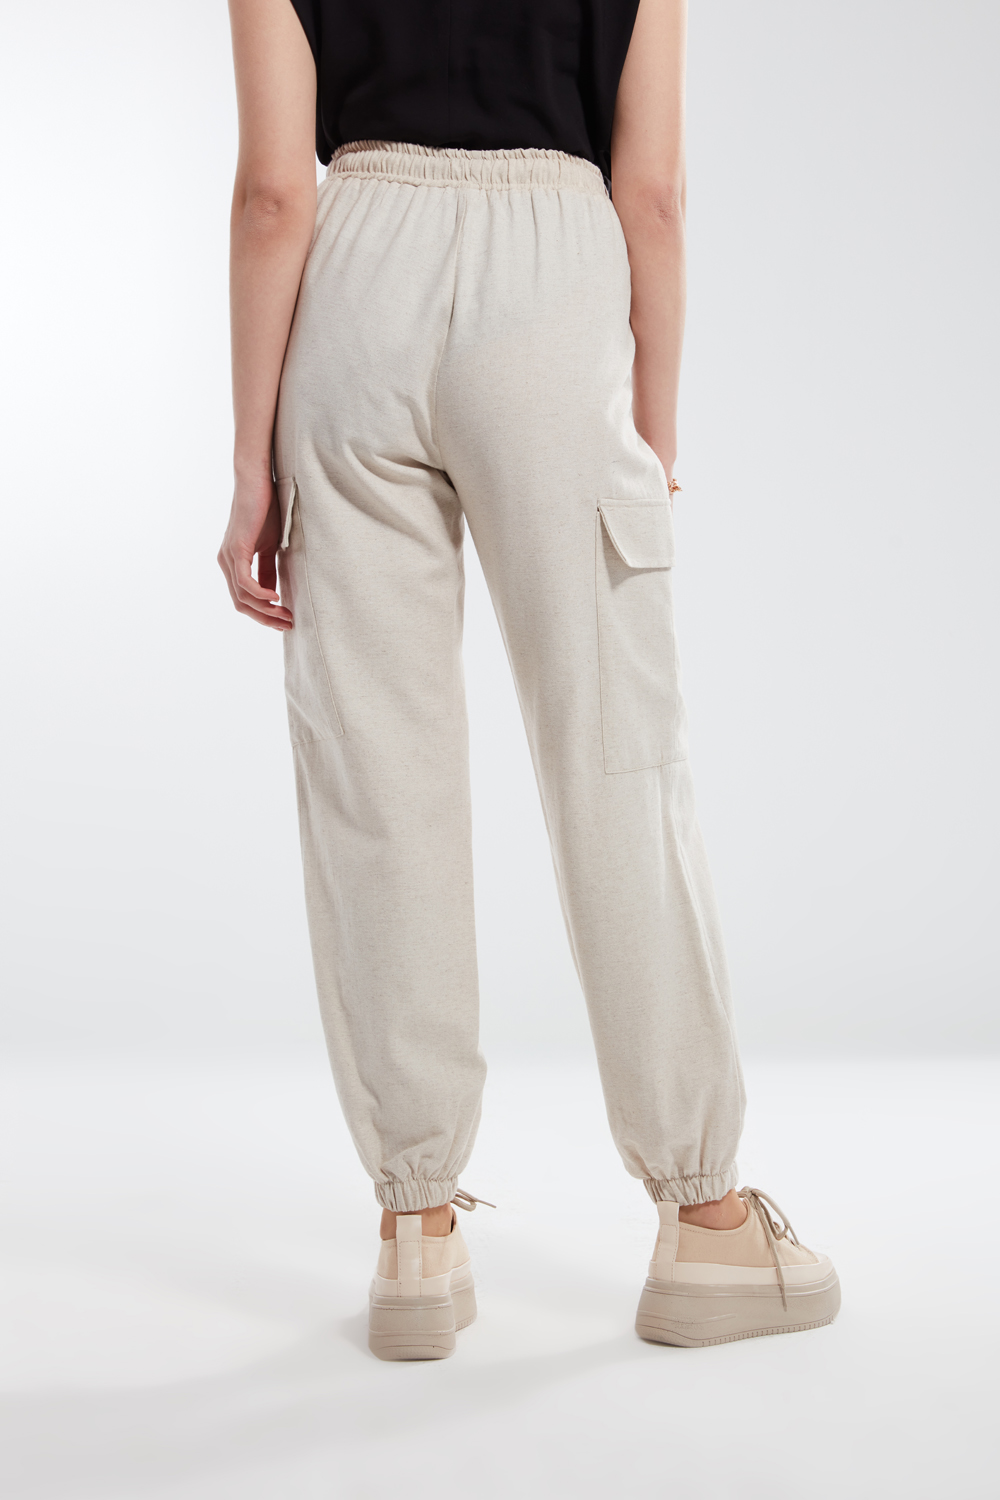 Linen Textured Patterned Cargo Pocket Trousers